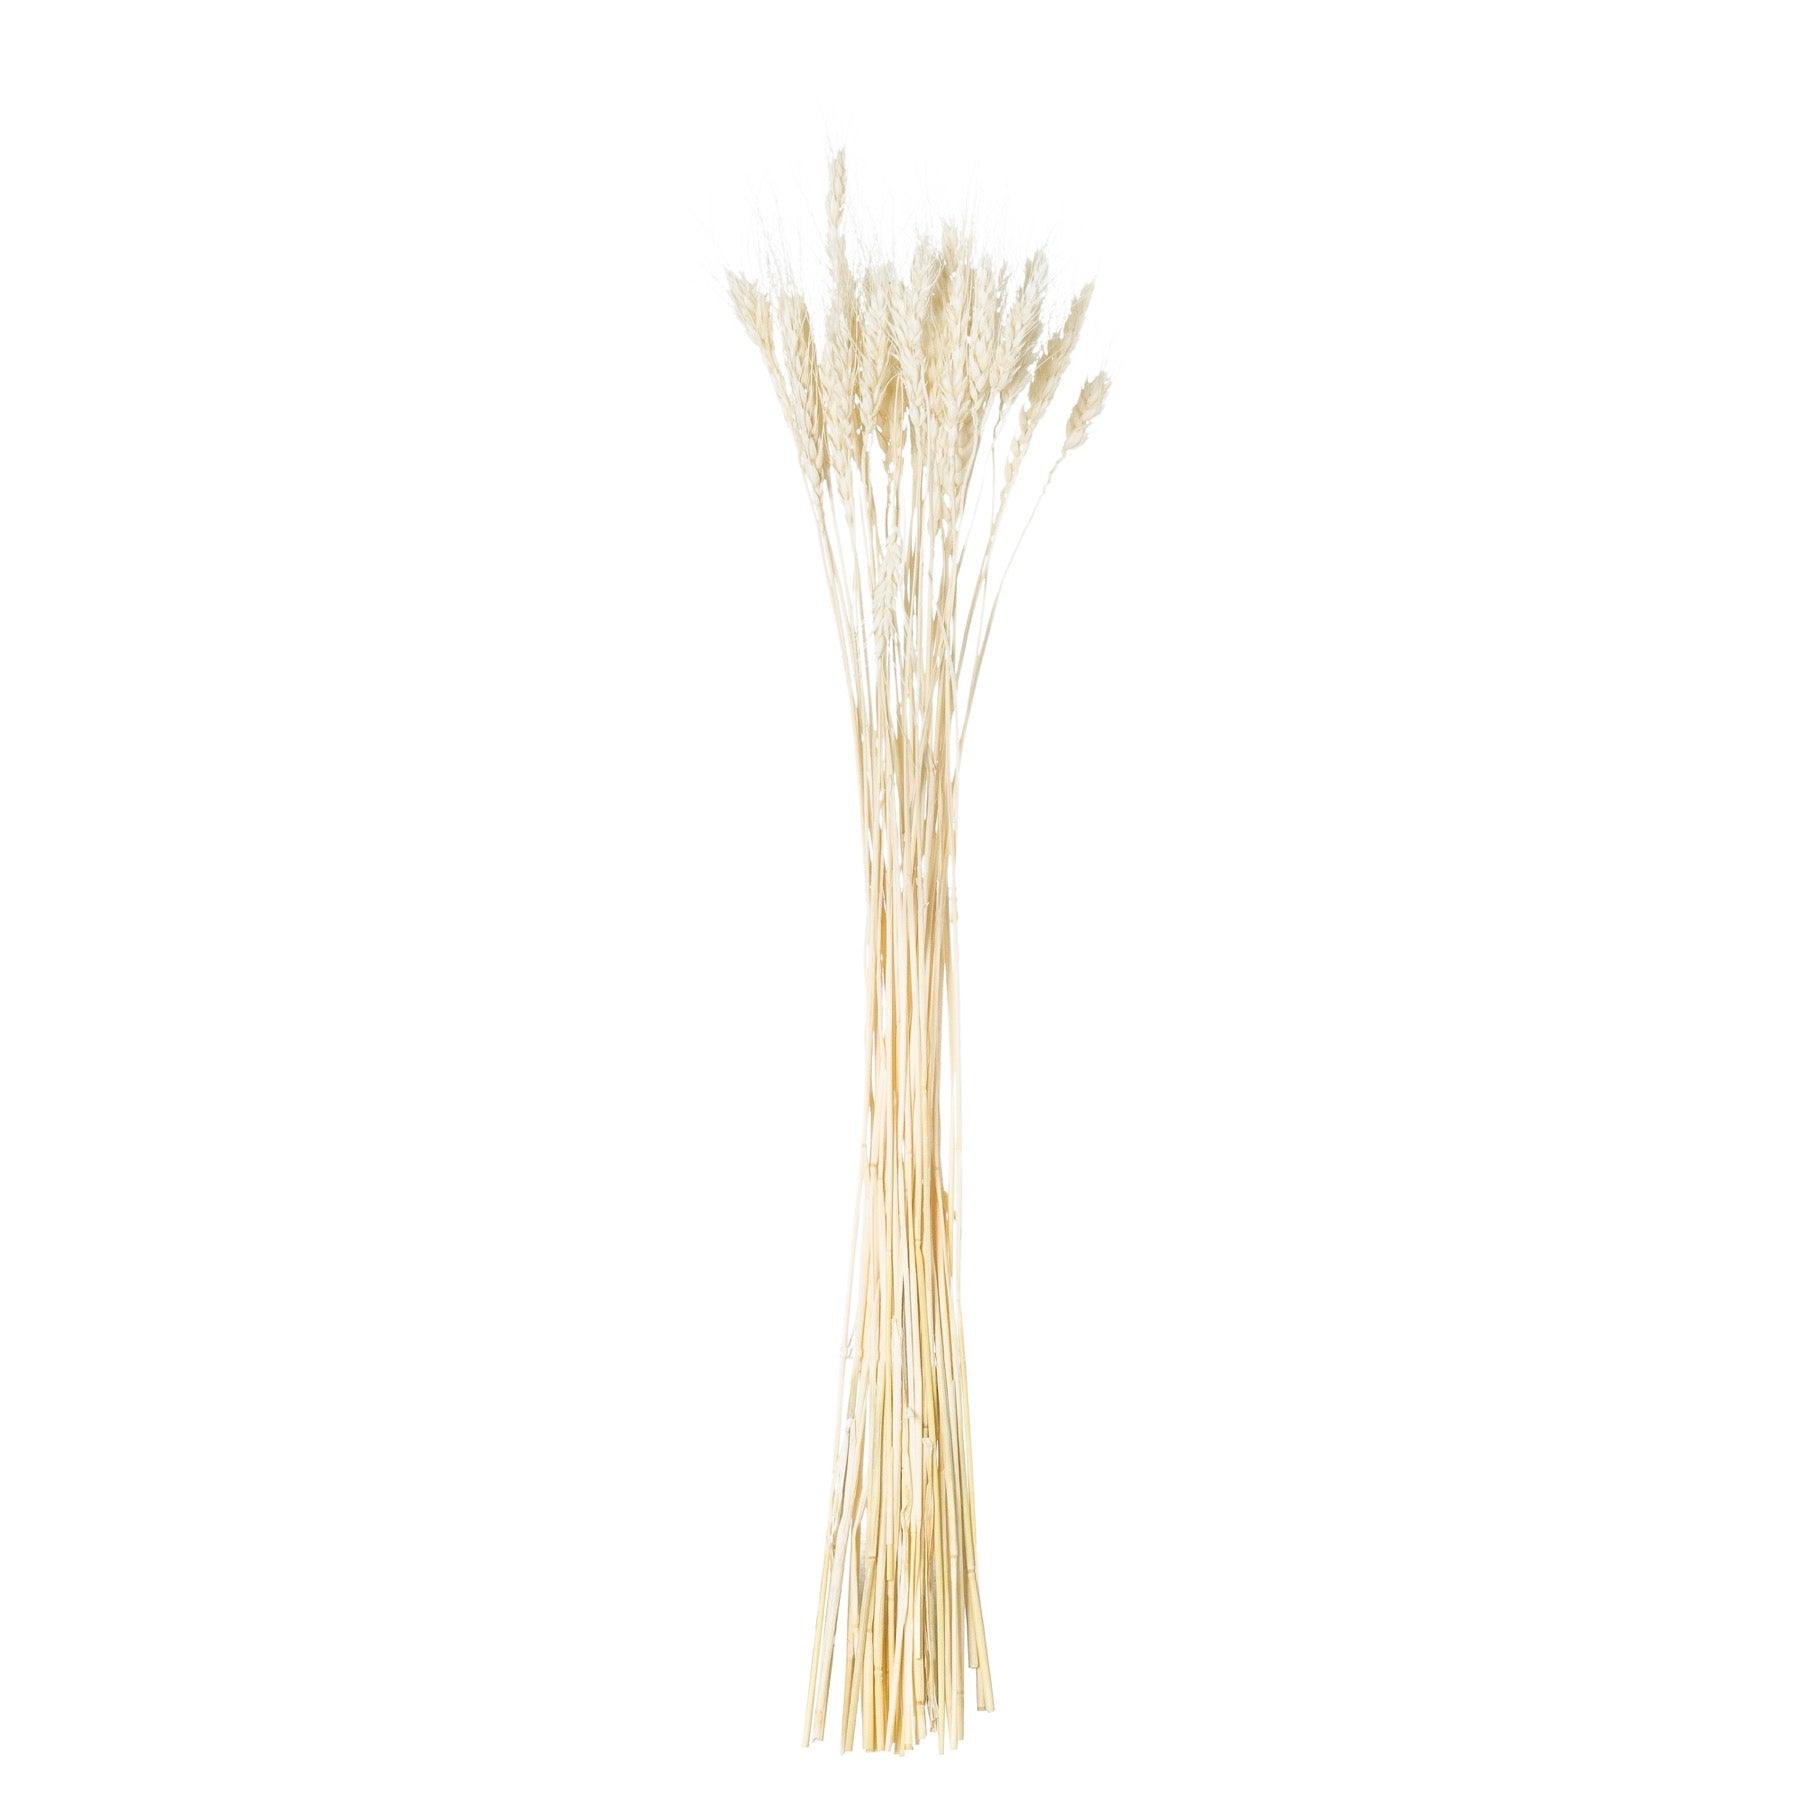 Dried White Wheat Bunch Of 20 - Vookoo Lifestyle